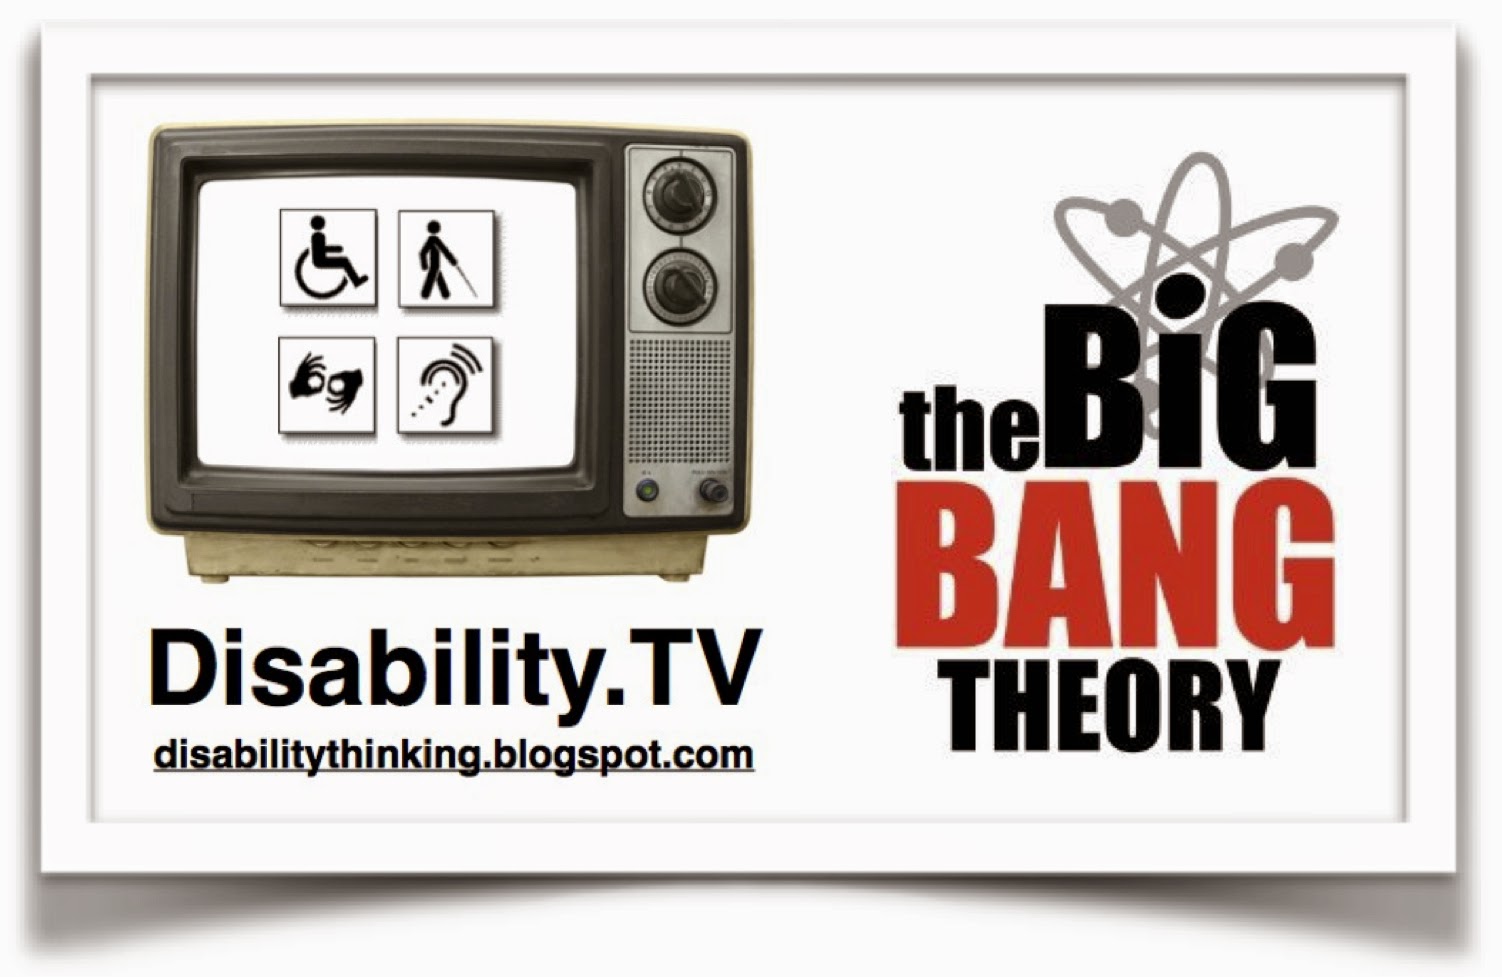 Disability.TV logo on the left, Big Bang Theory logo on the right.